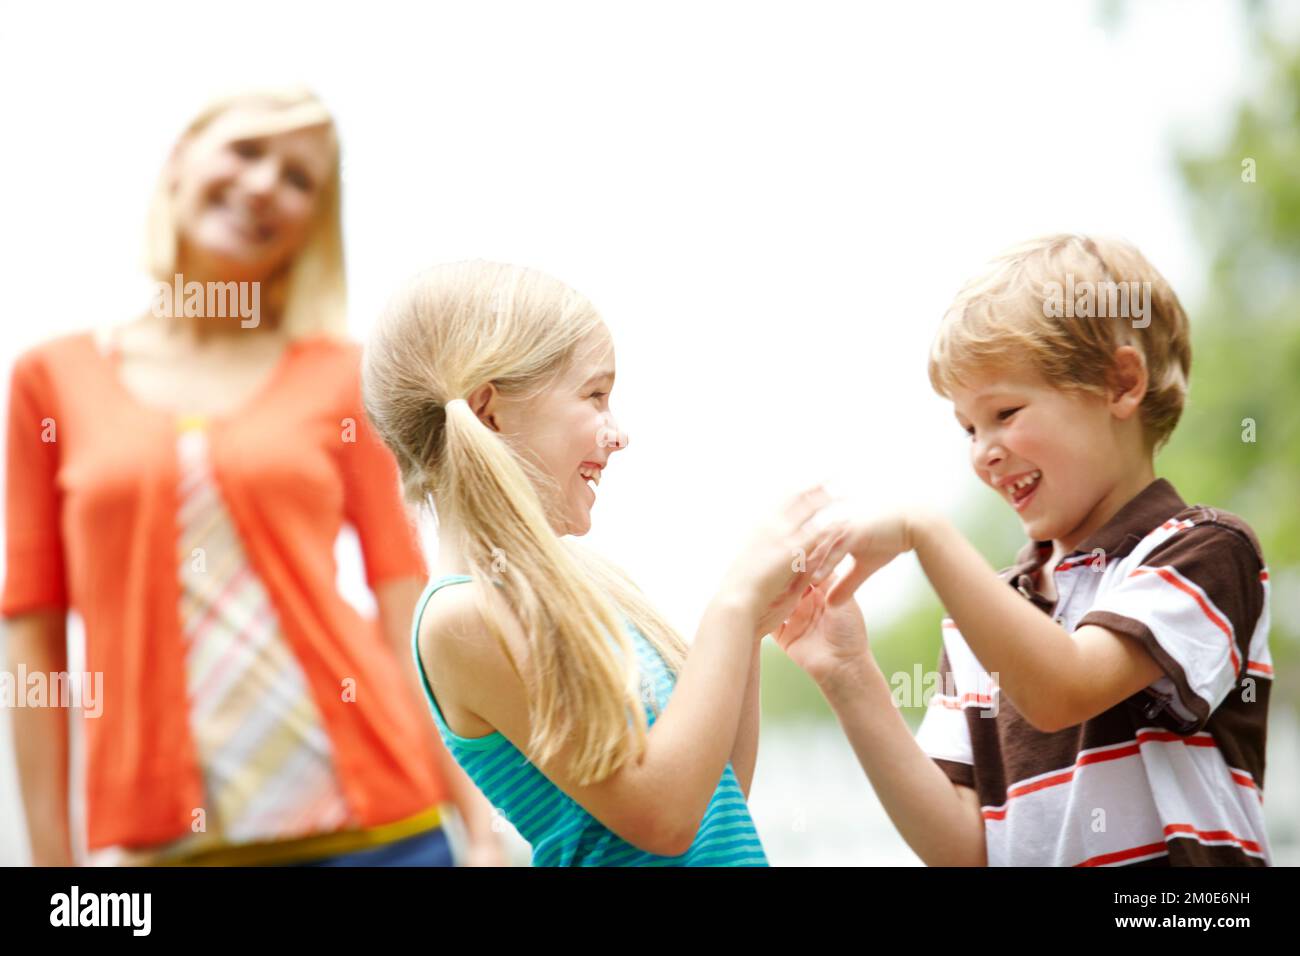 Playing together while relaxing with mom. Two cute young children spending time outdoors with their mother. Stock Photo